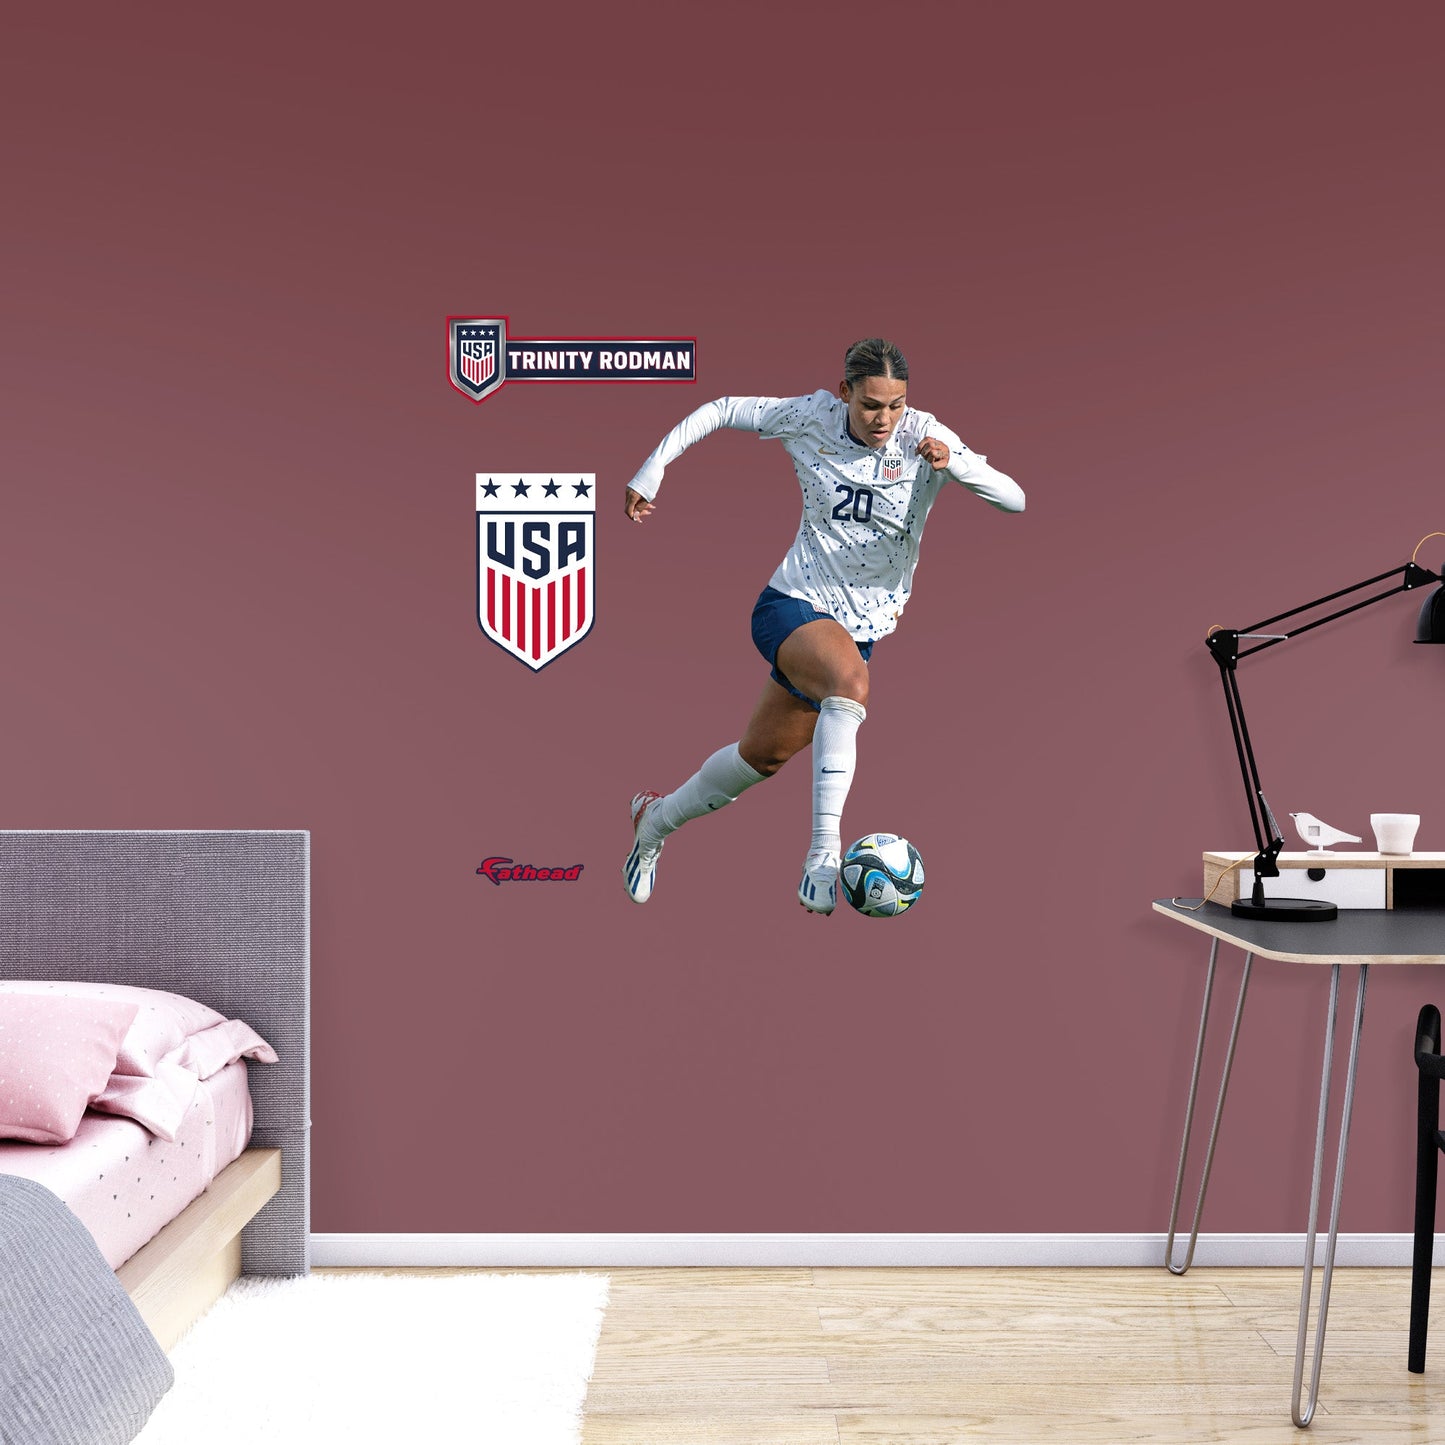 Trinity Rodman  #20        - Officially Licensed USWNT Removable     Adhesive Decal